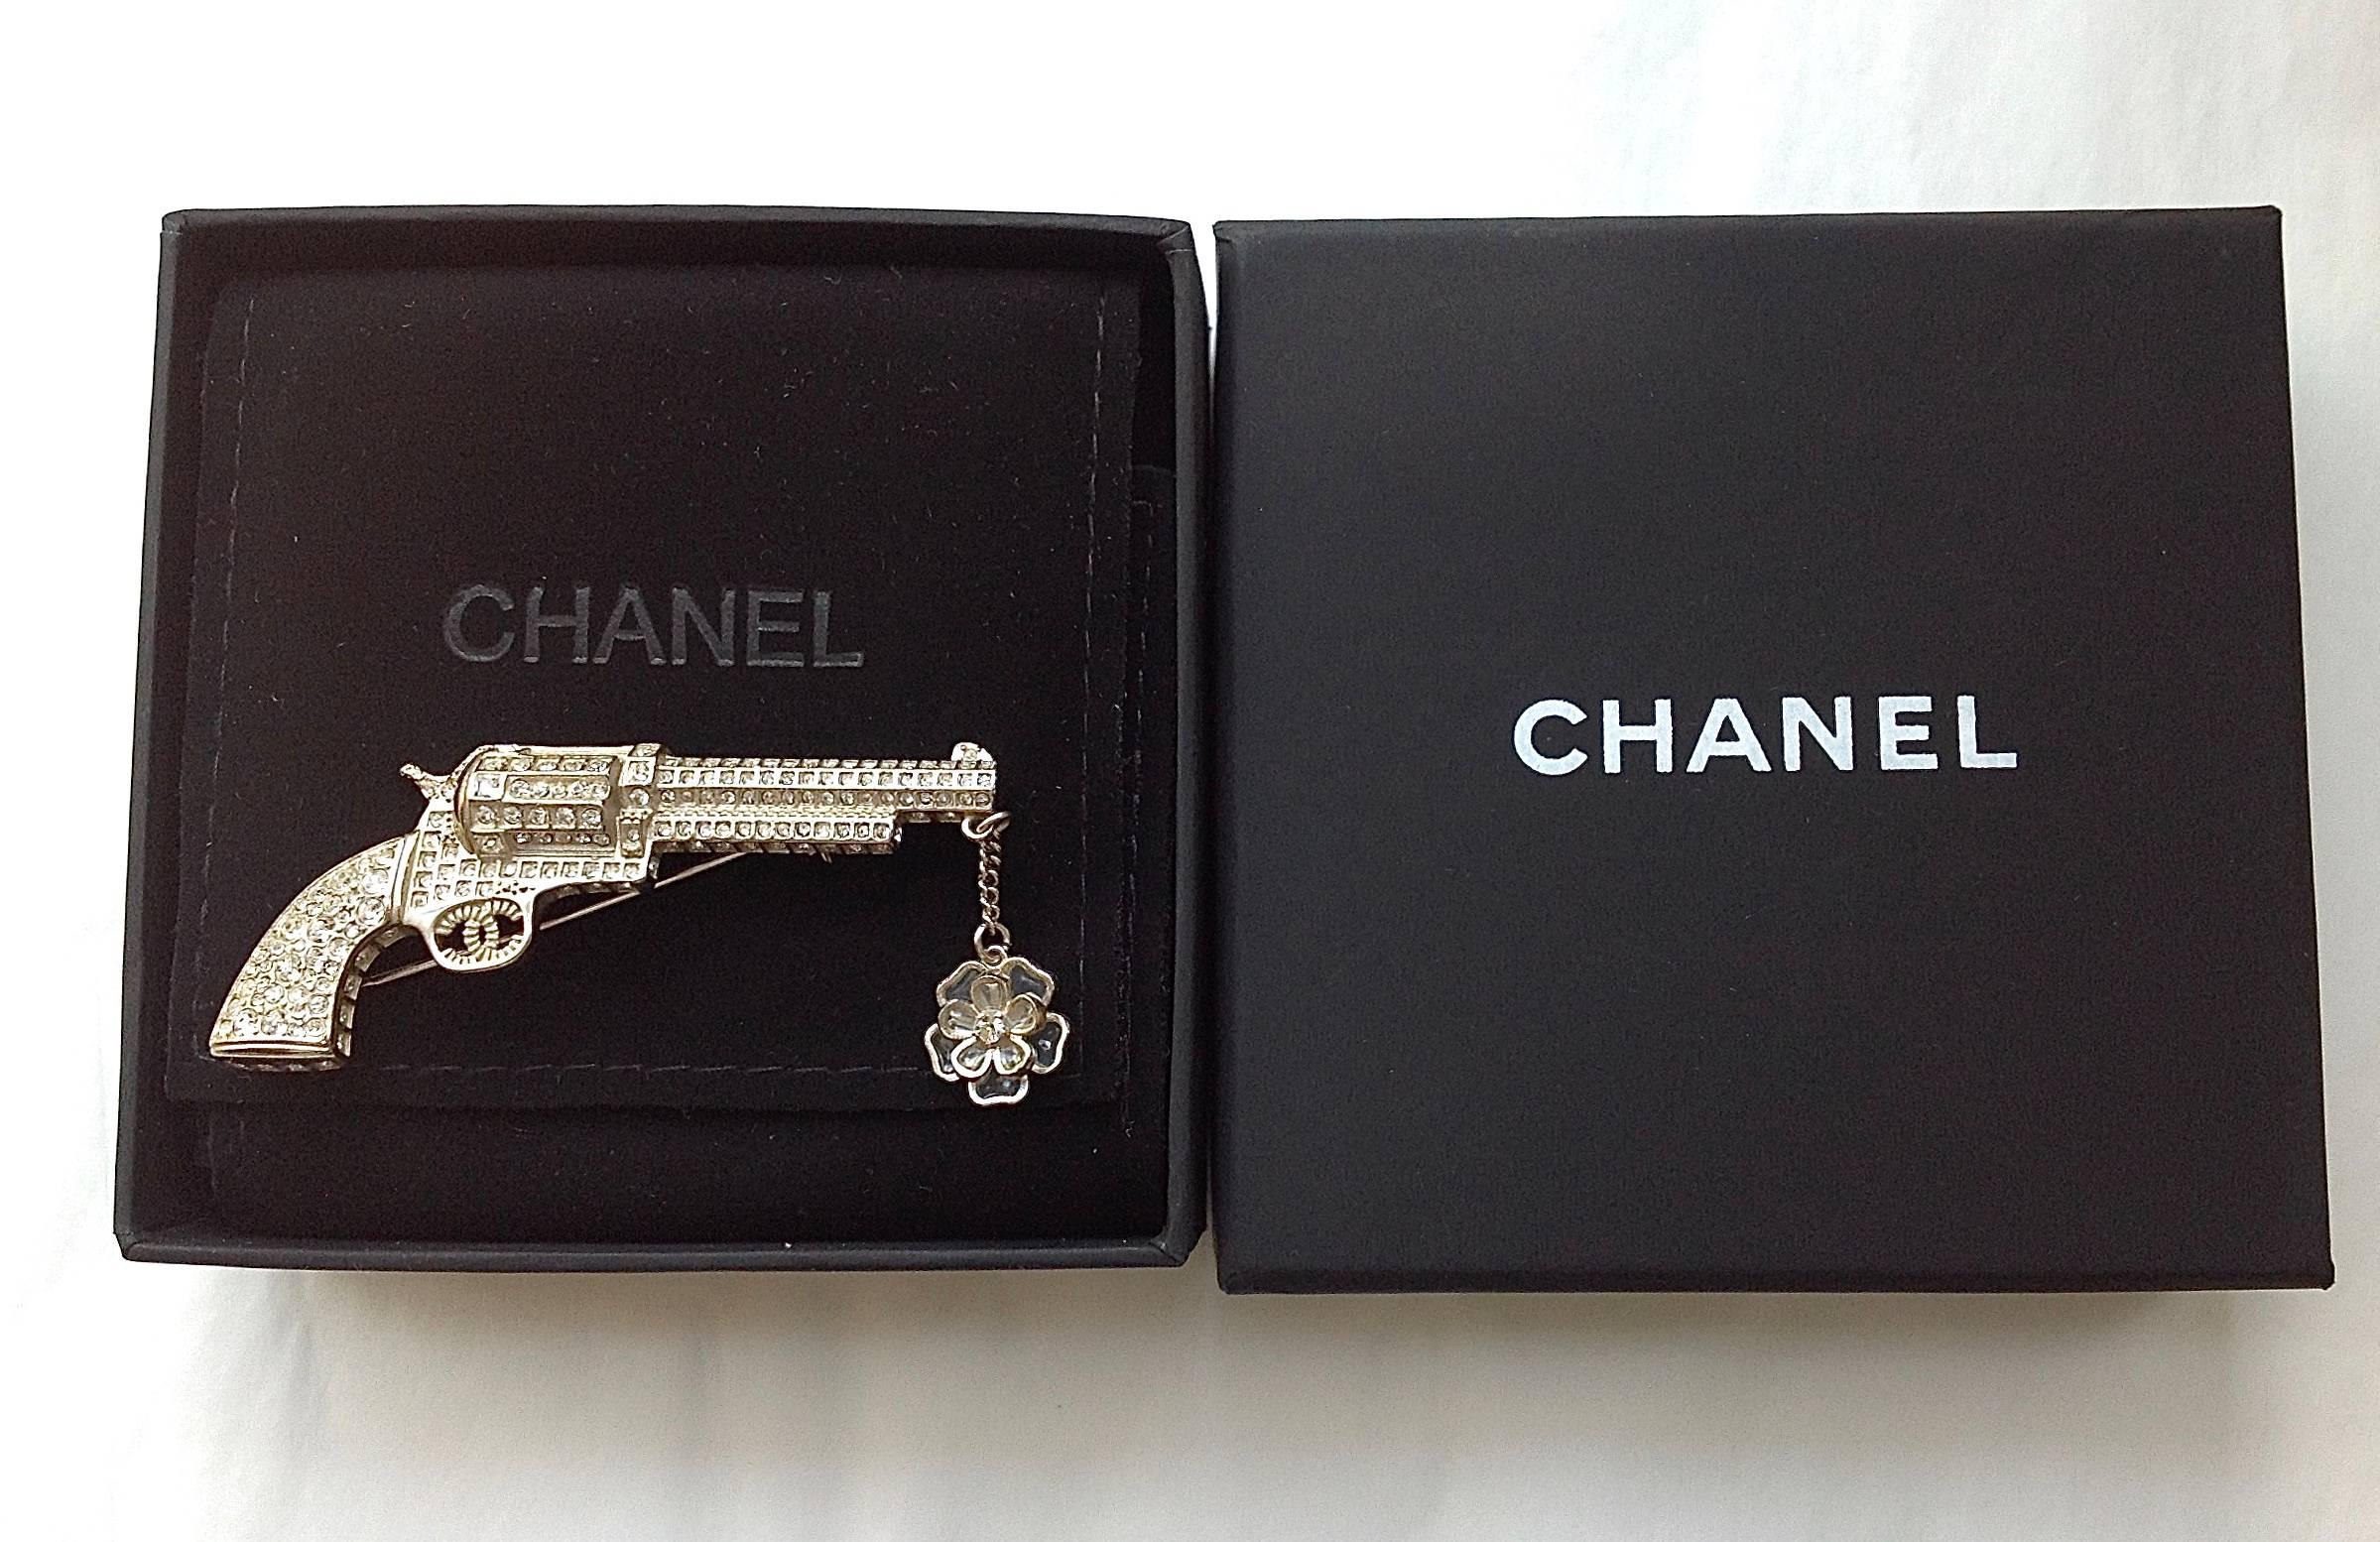 A collector's piece from Chanel Fall/Winter 2014-2015 Paris -Dallas collection. All the details from every angles showing this ultimate craftsmanship to make this brooch just like a real pistol with sweetness. 
Fully adorn with baguette crystals